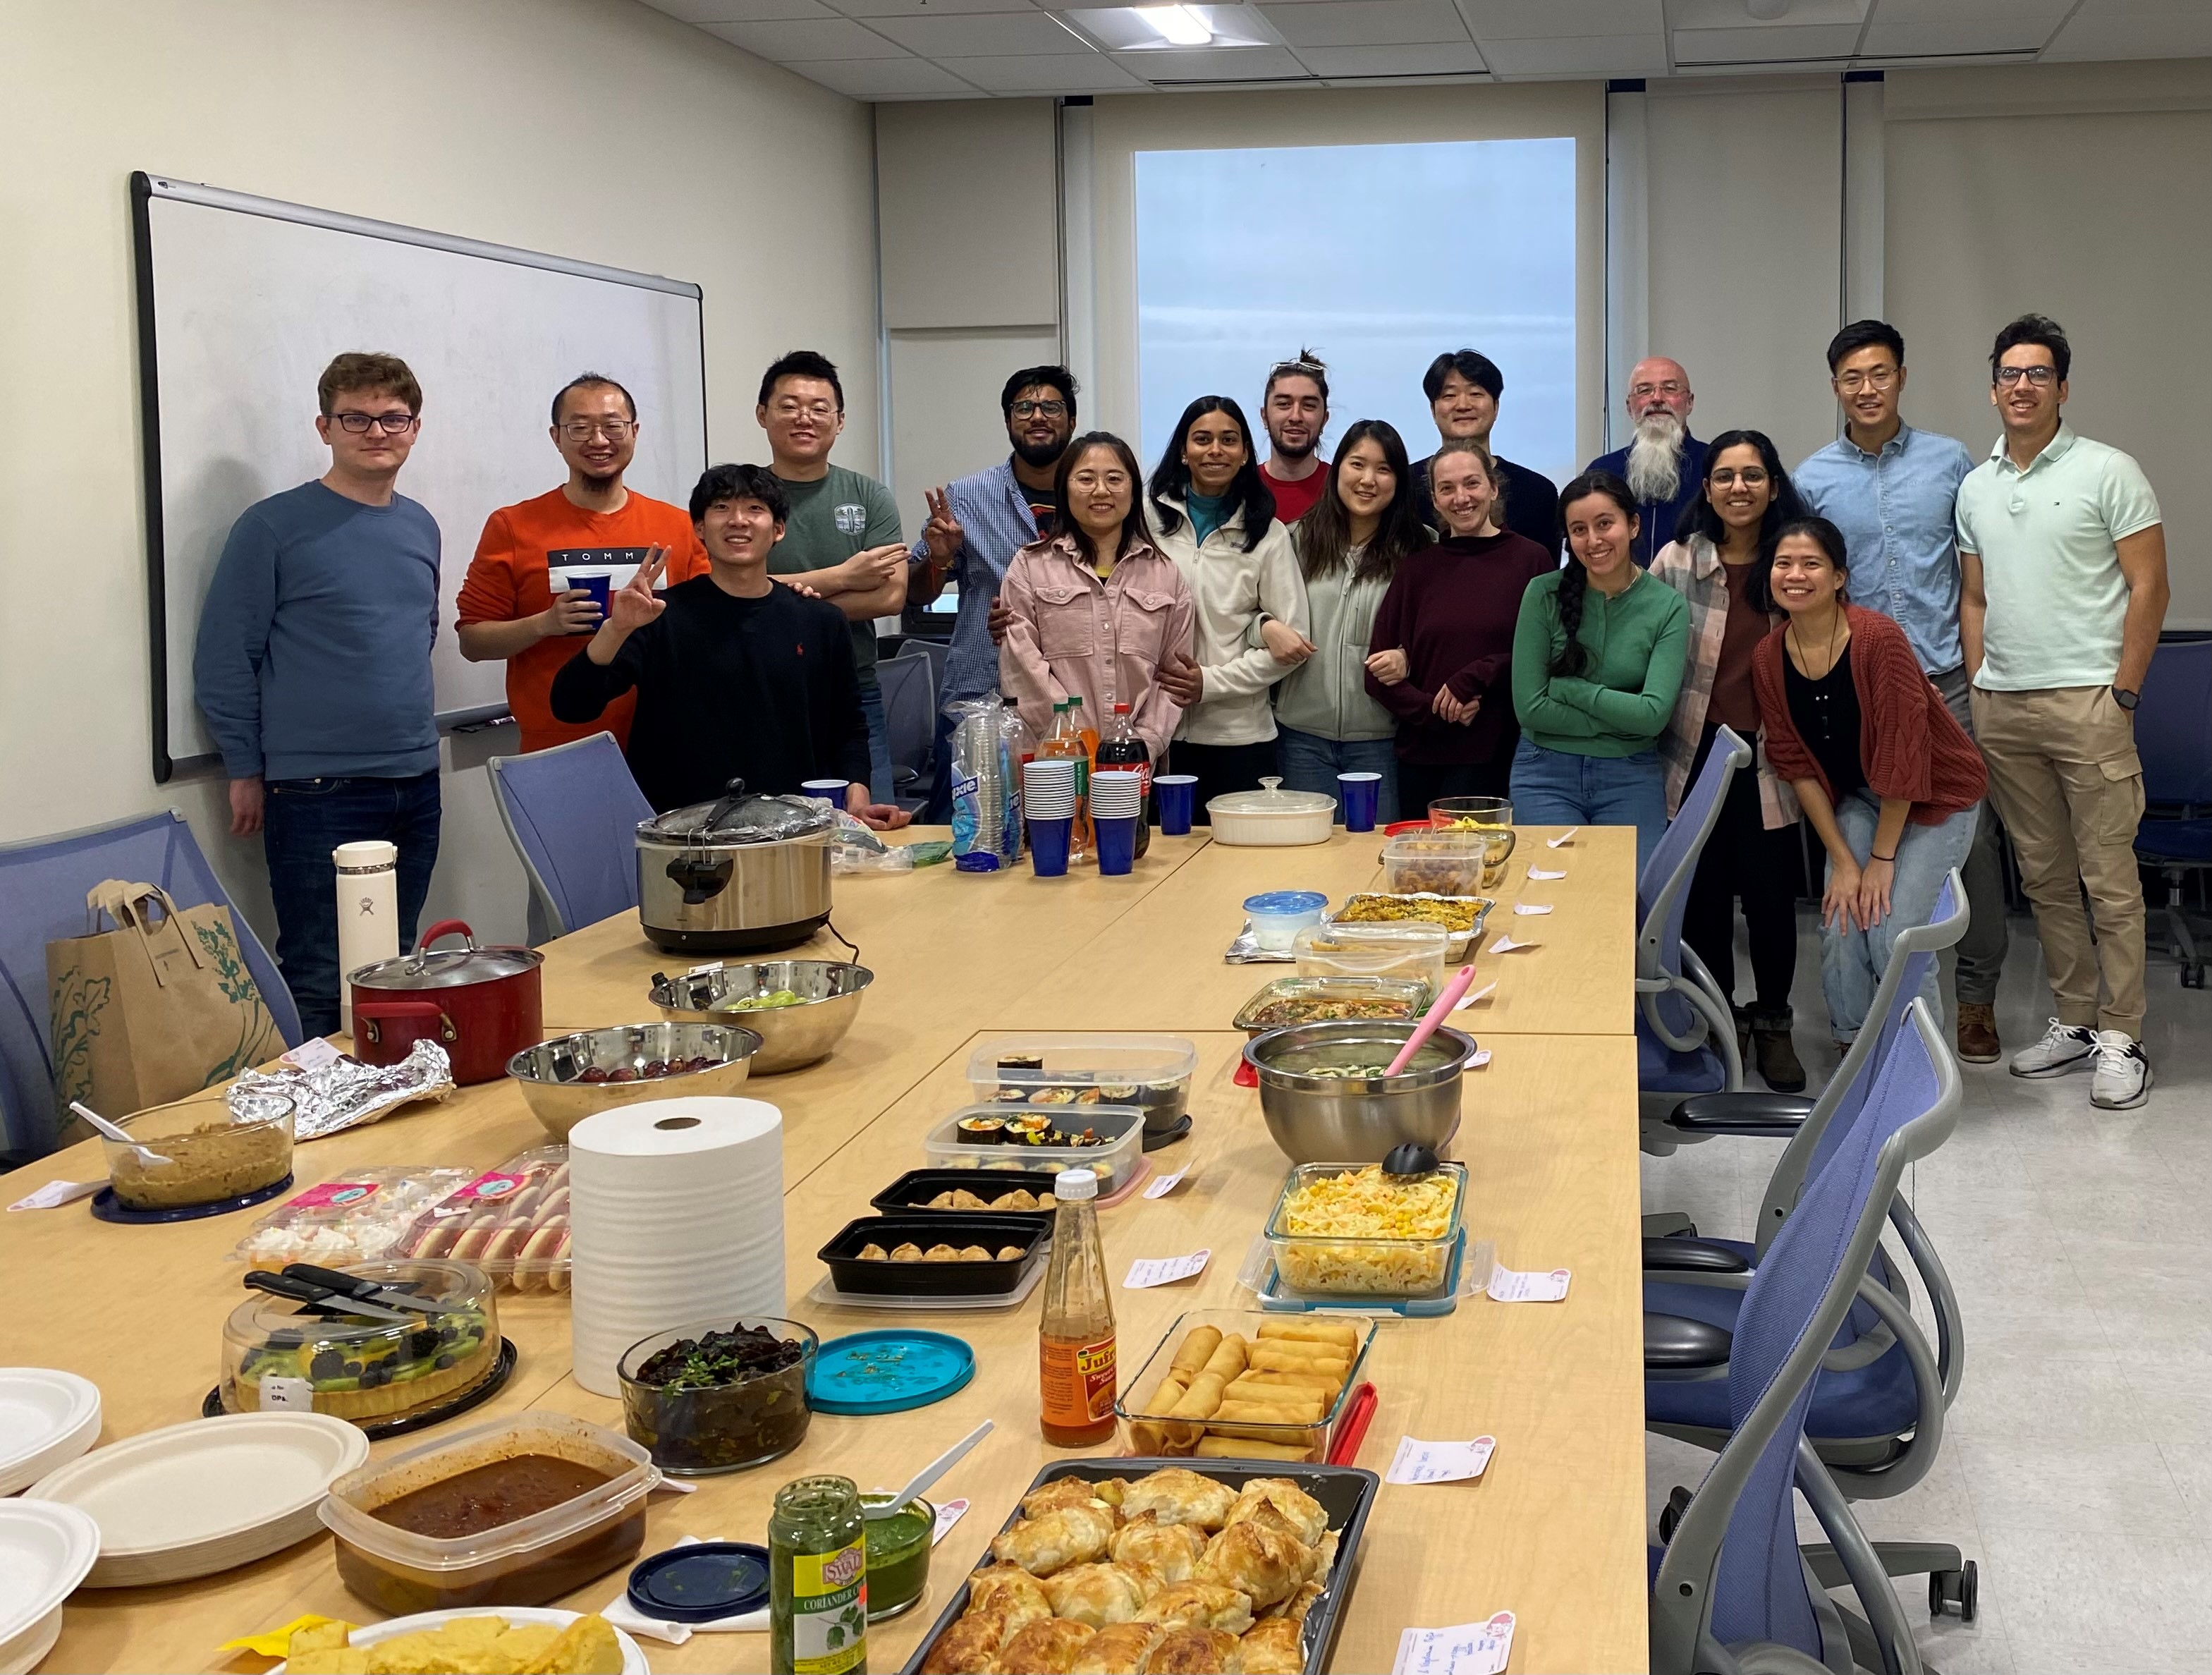 Great food at annual lab potluck! – Rotello Research Group